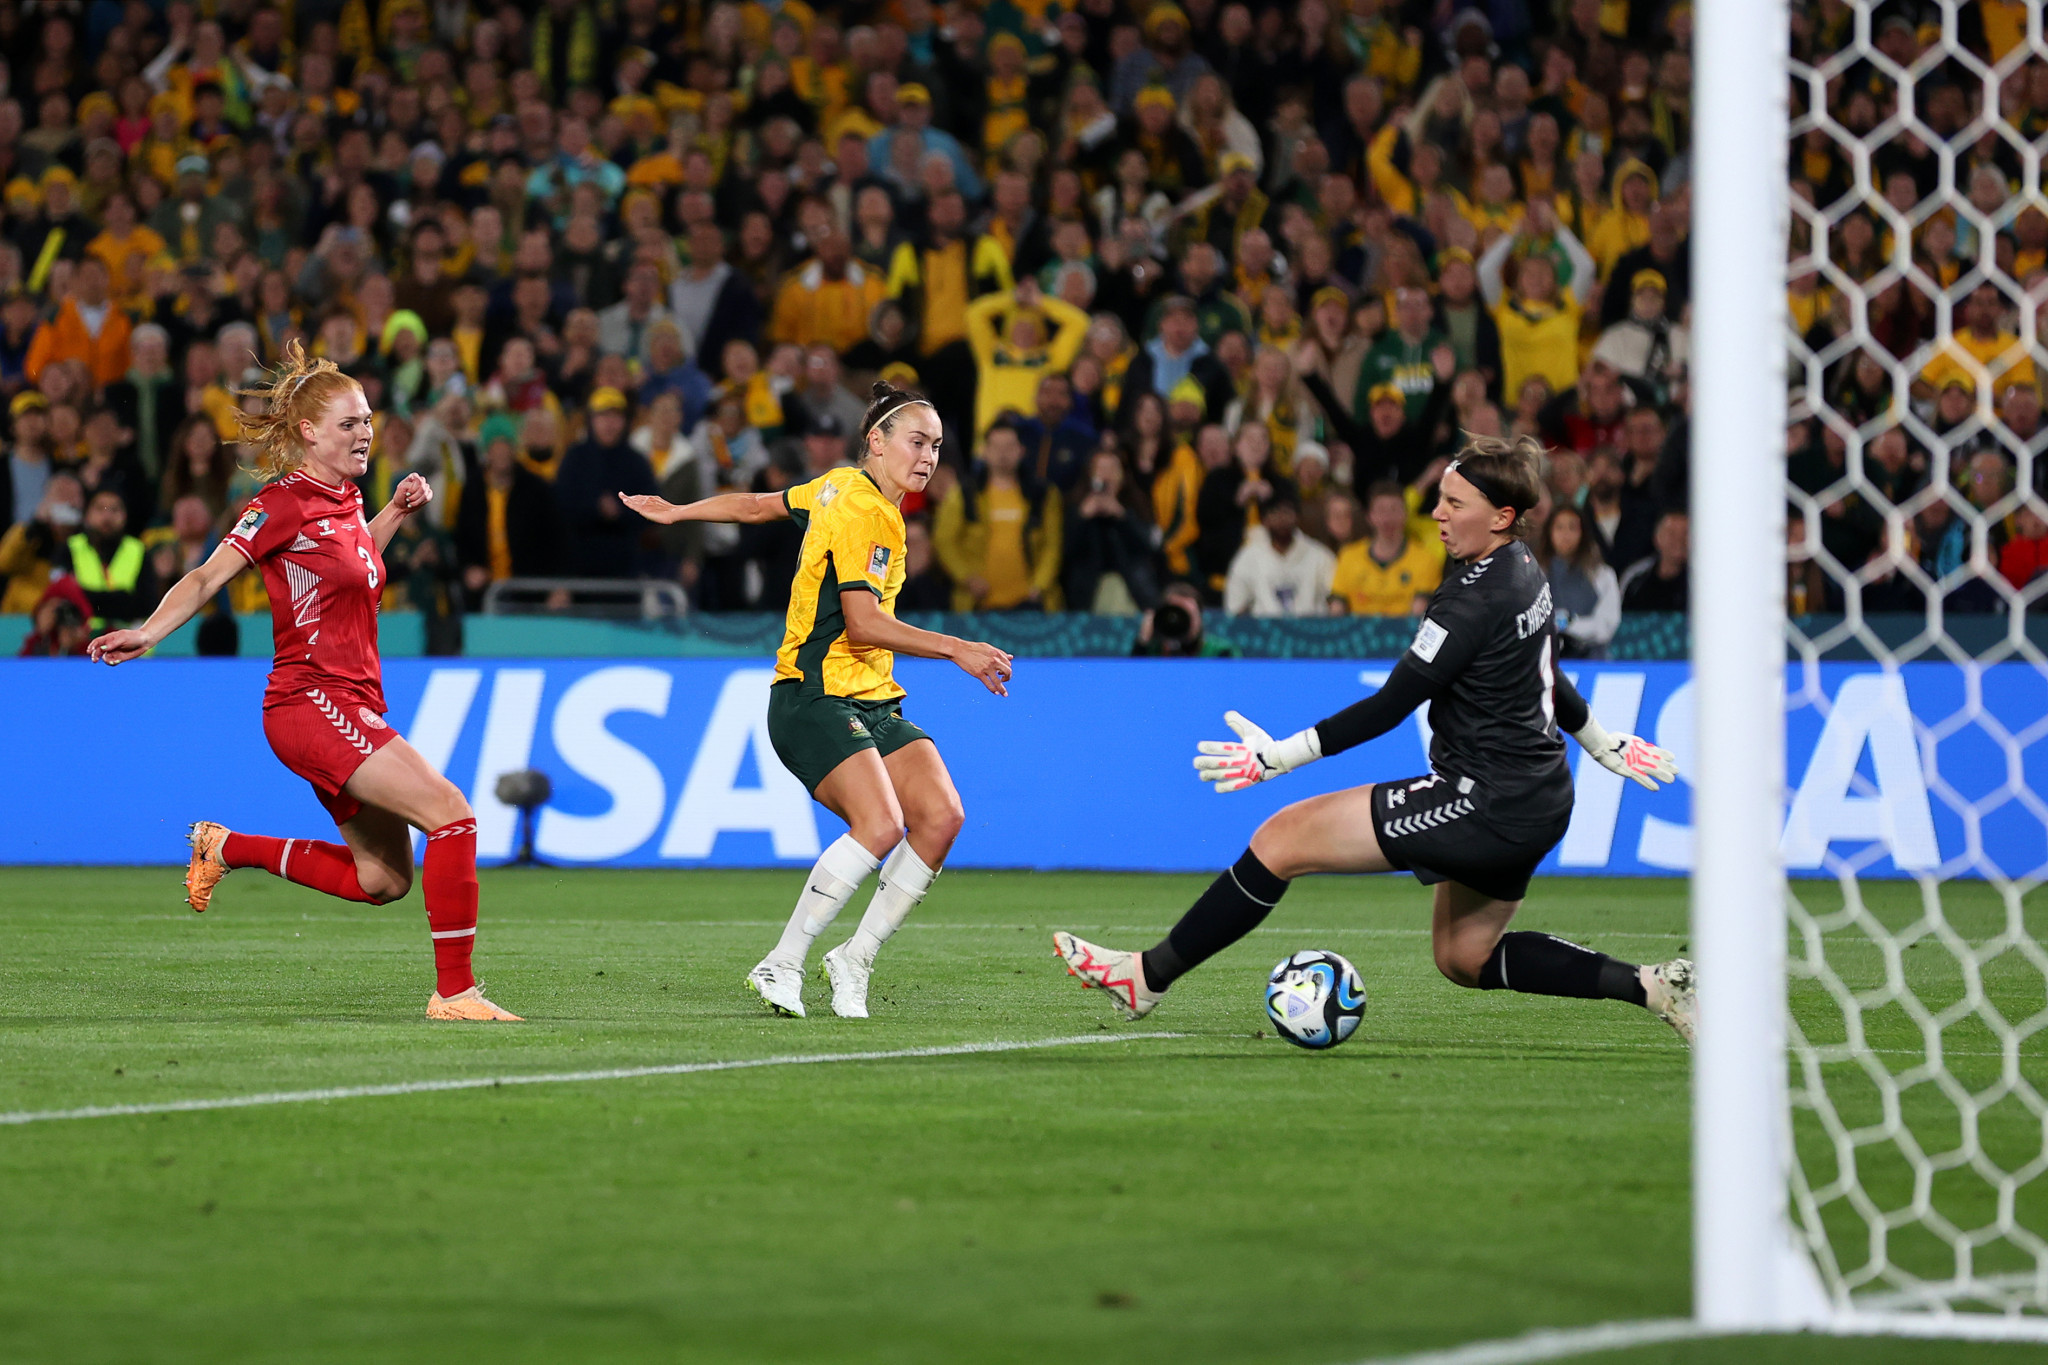 Australia beat Denmark in front of a record-equalling crowd of 75,784 for a women's football match in the country ©Getty Images